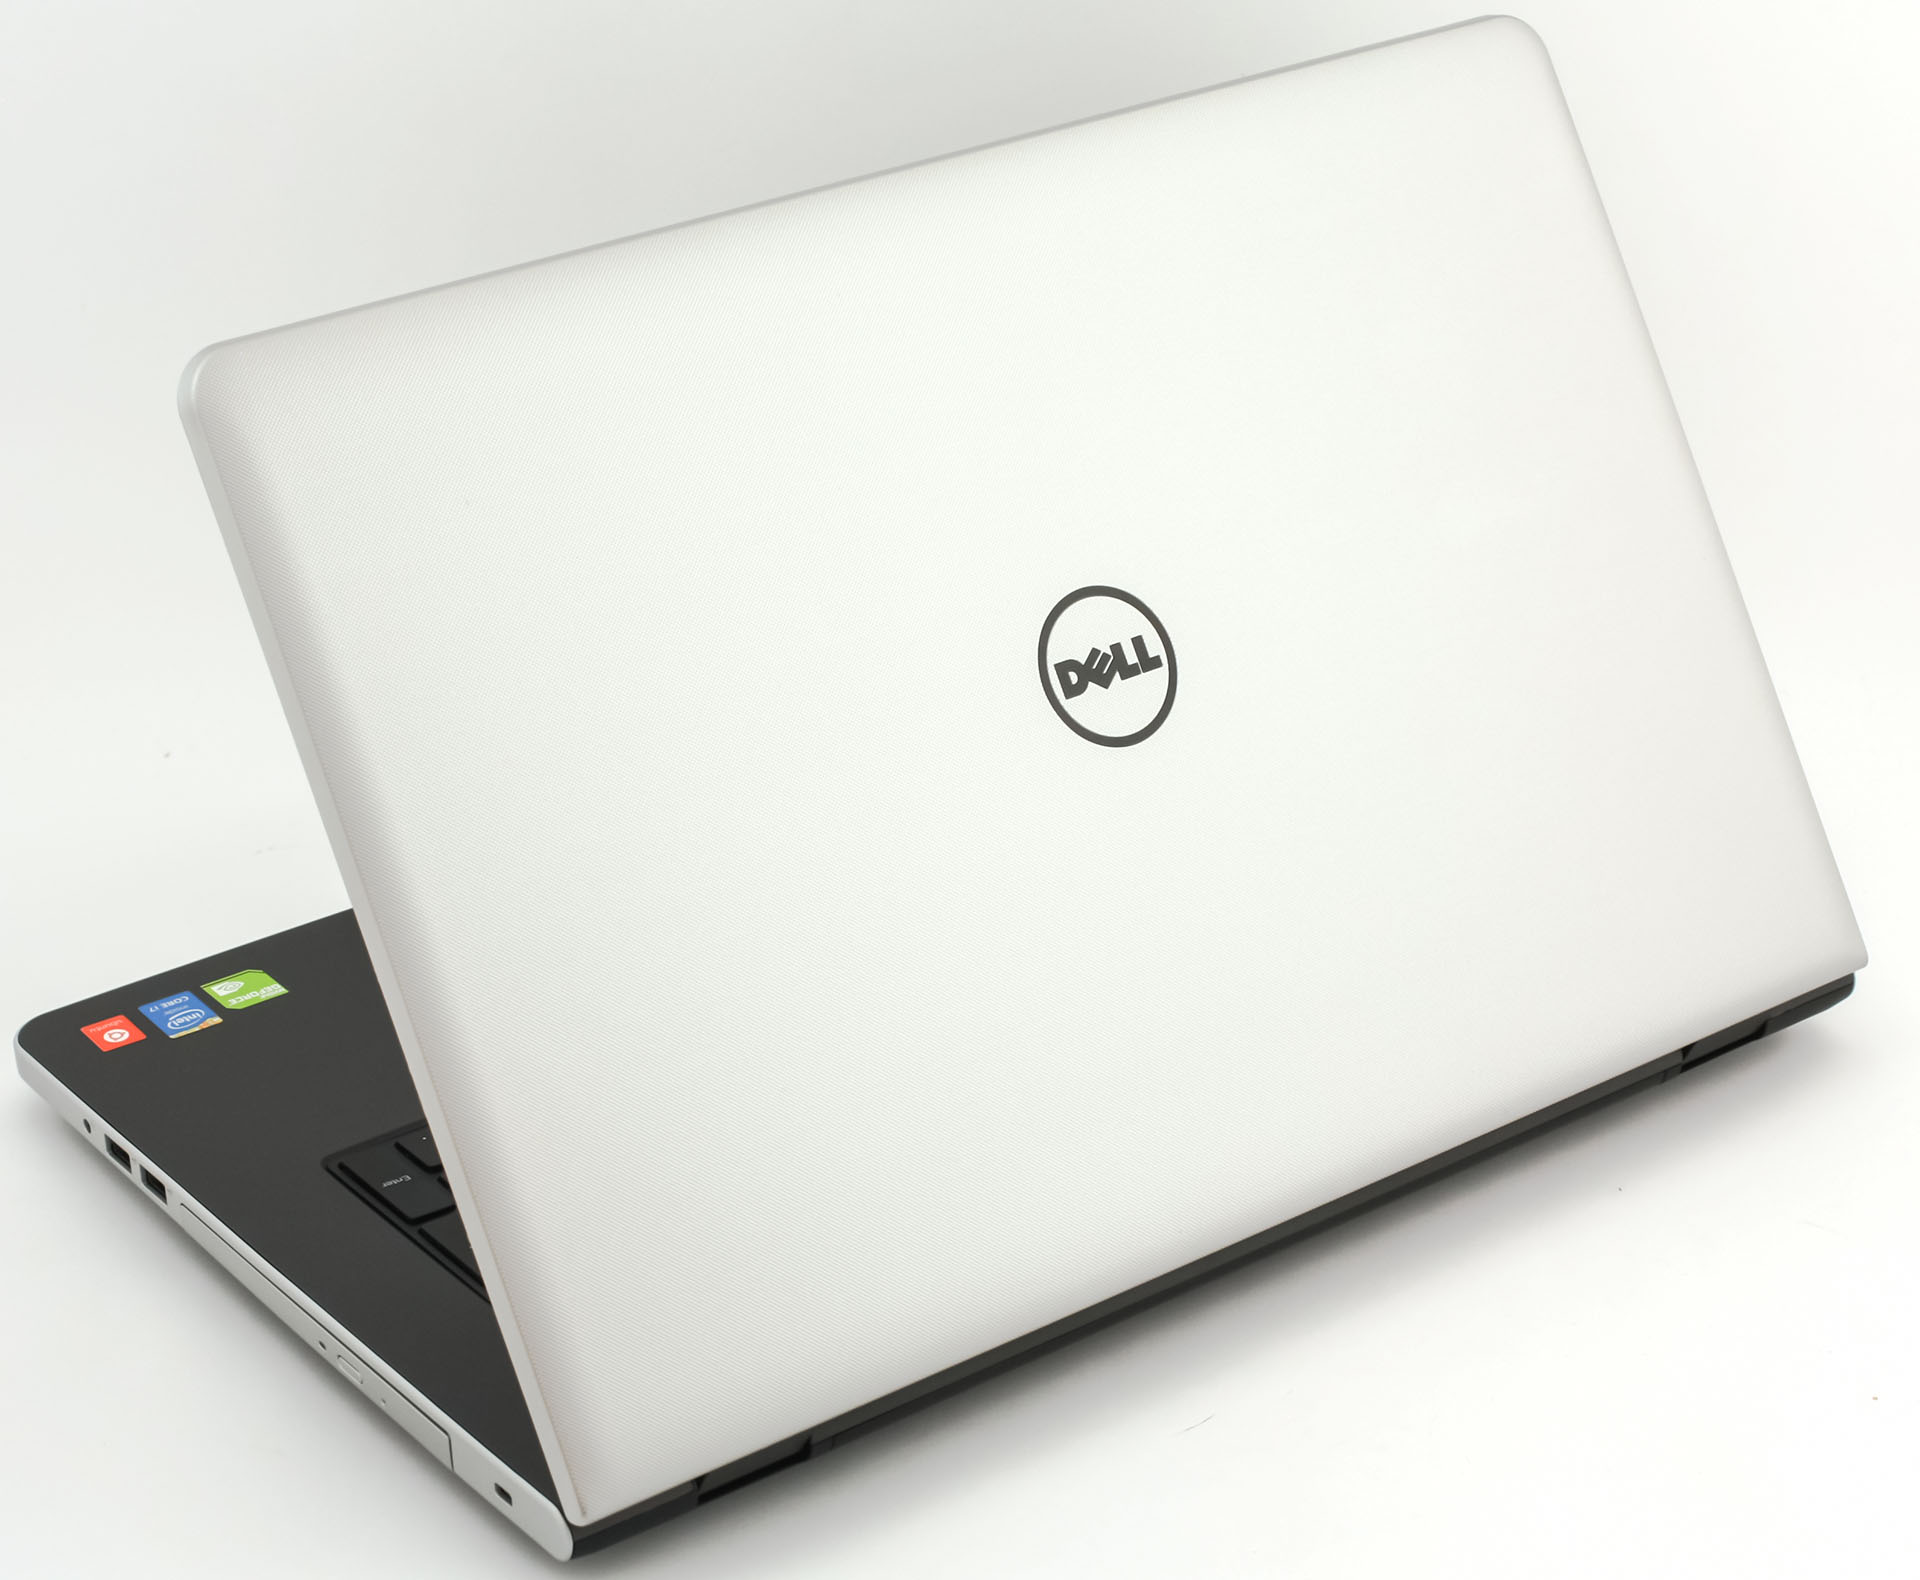 Dell Inspiron 17 5758 - Specs, Tests, and Prices | LaptopMedia.com